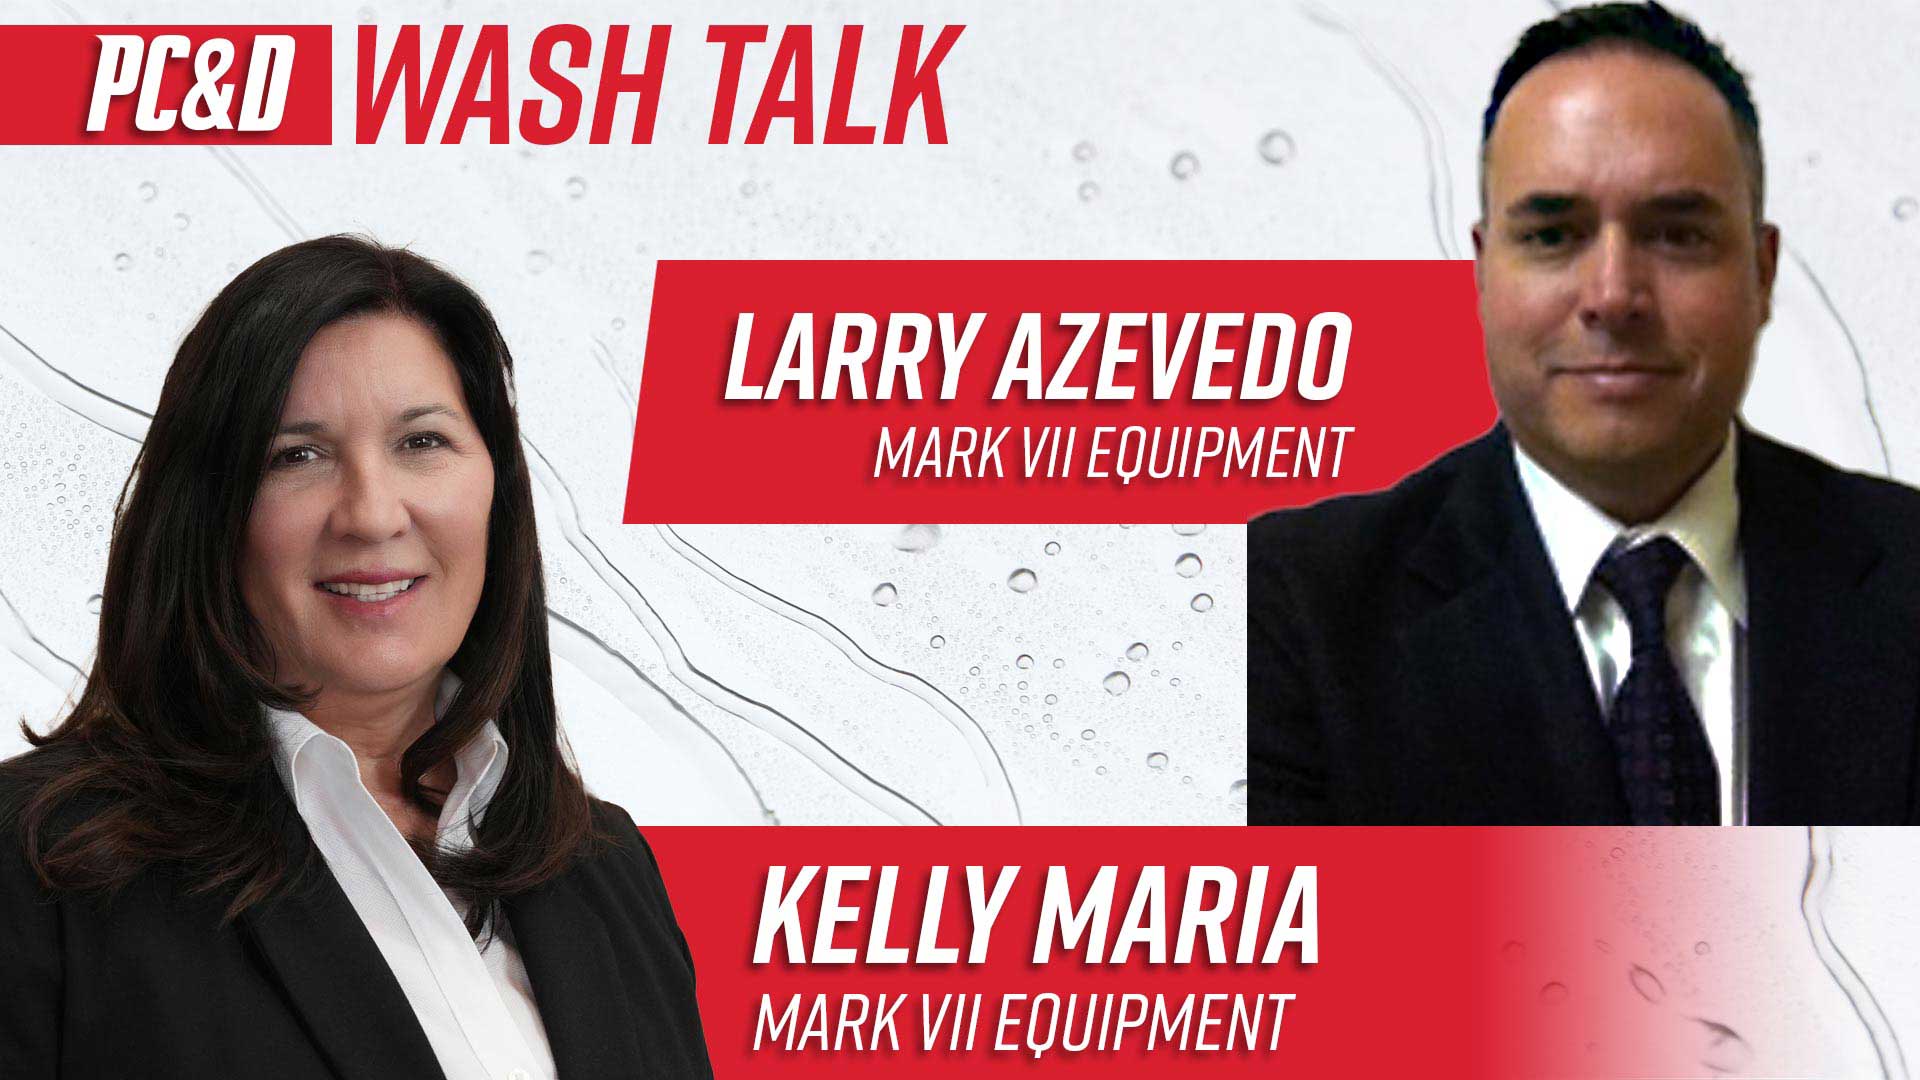 Kelly Maria, vice president of chemical and service operations, and Larry Azevedo, operations manager, of Mark VII Equipment.